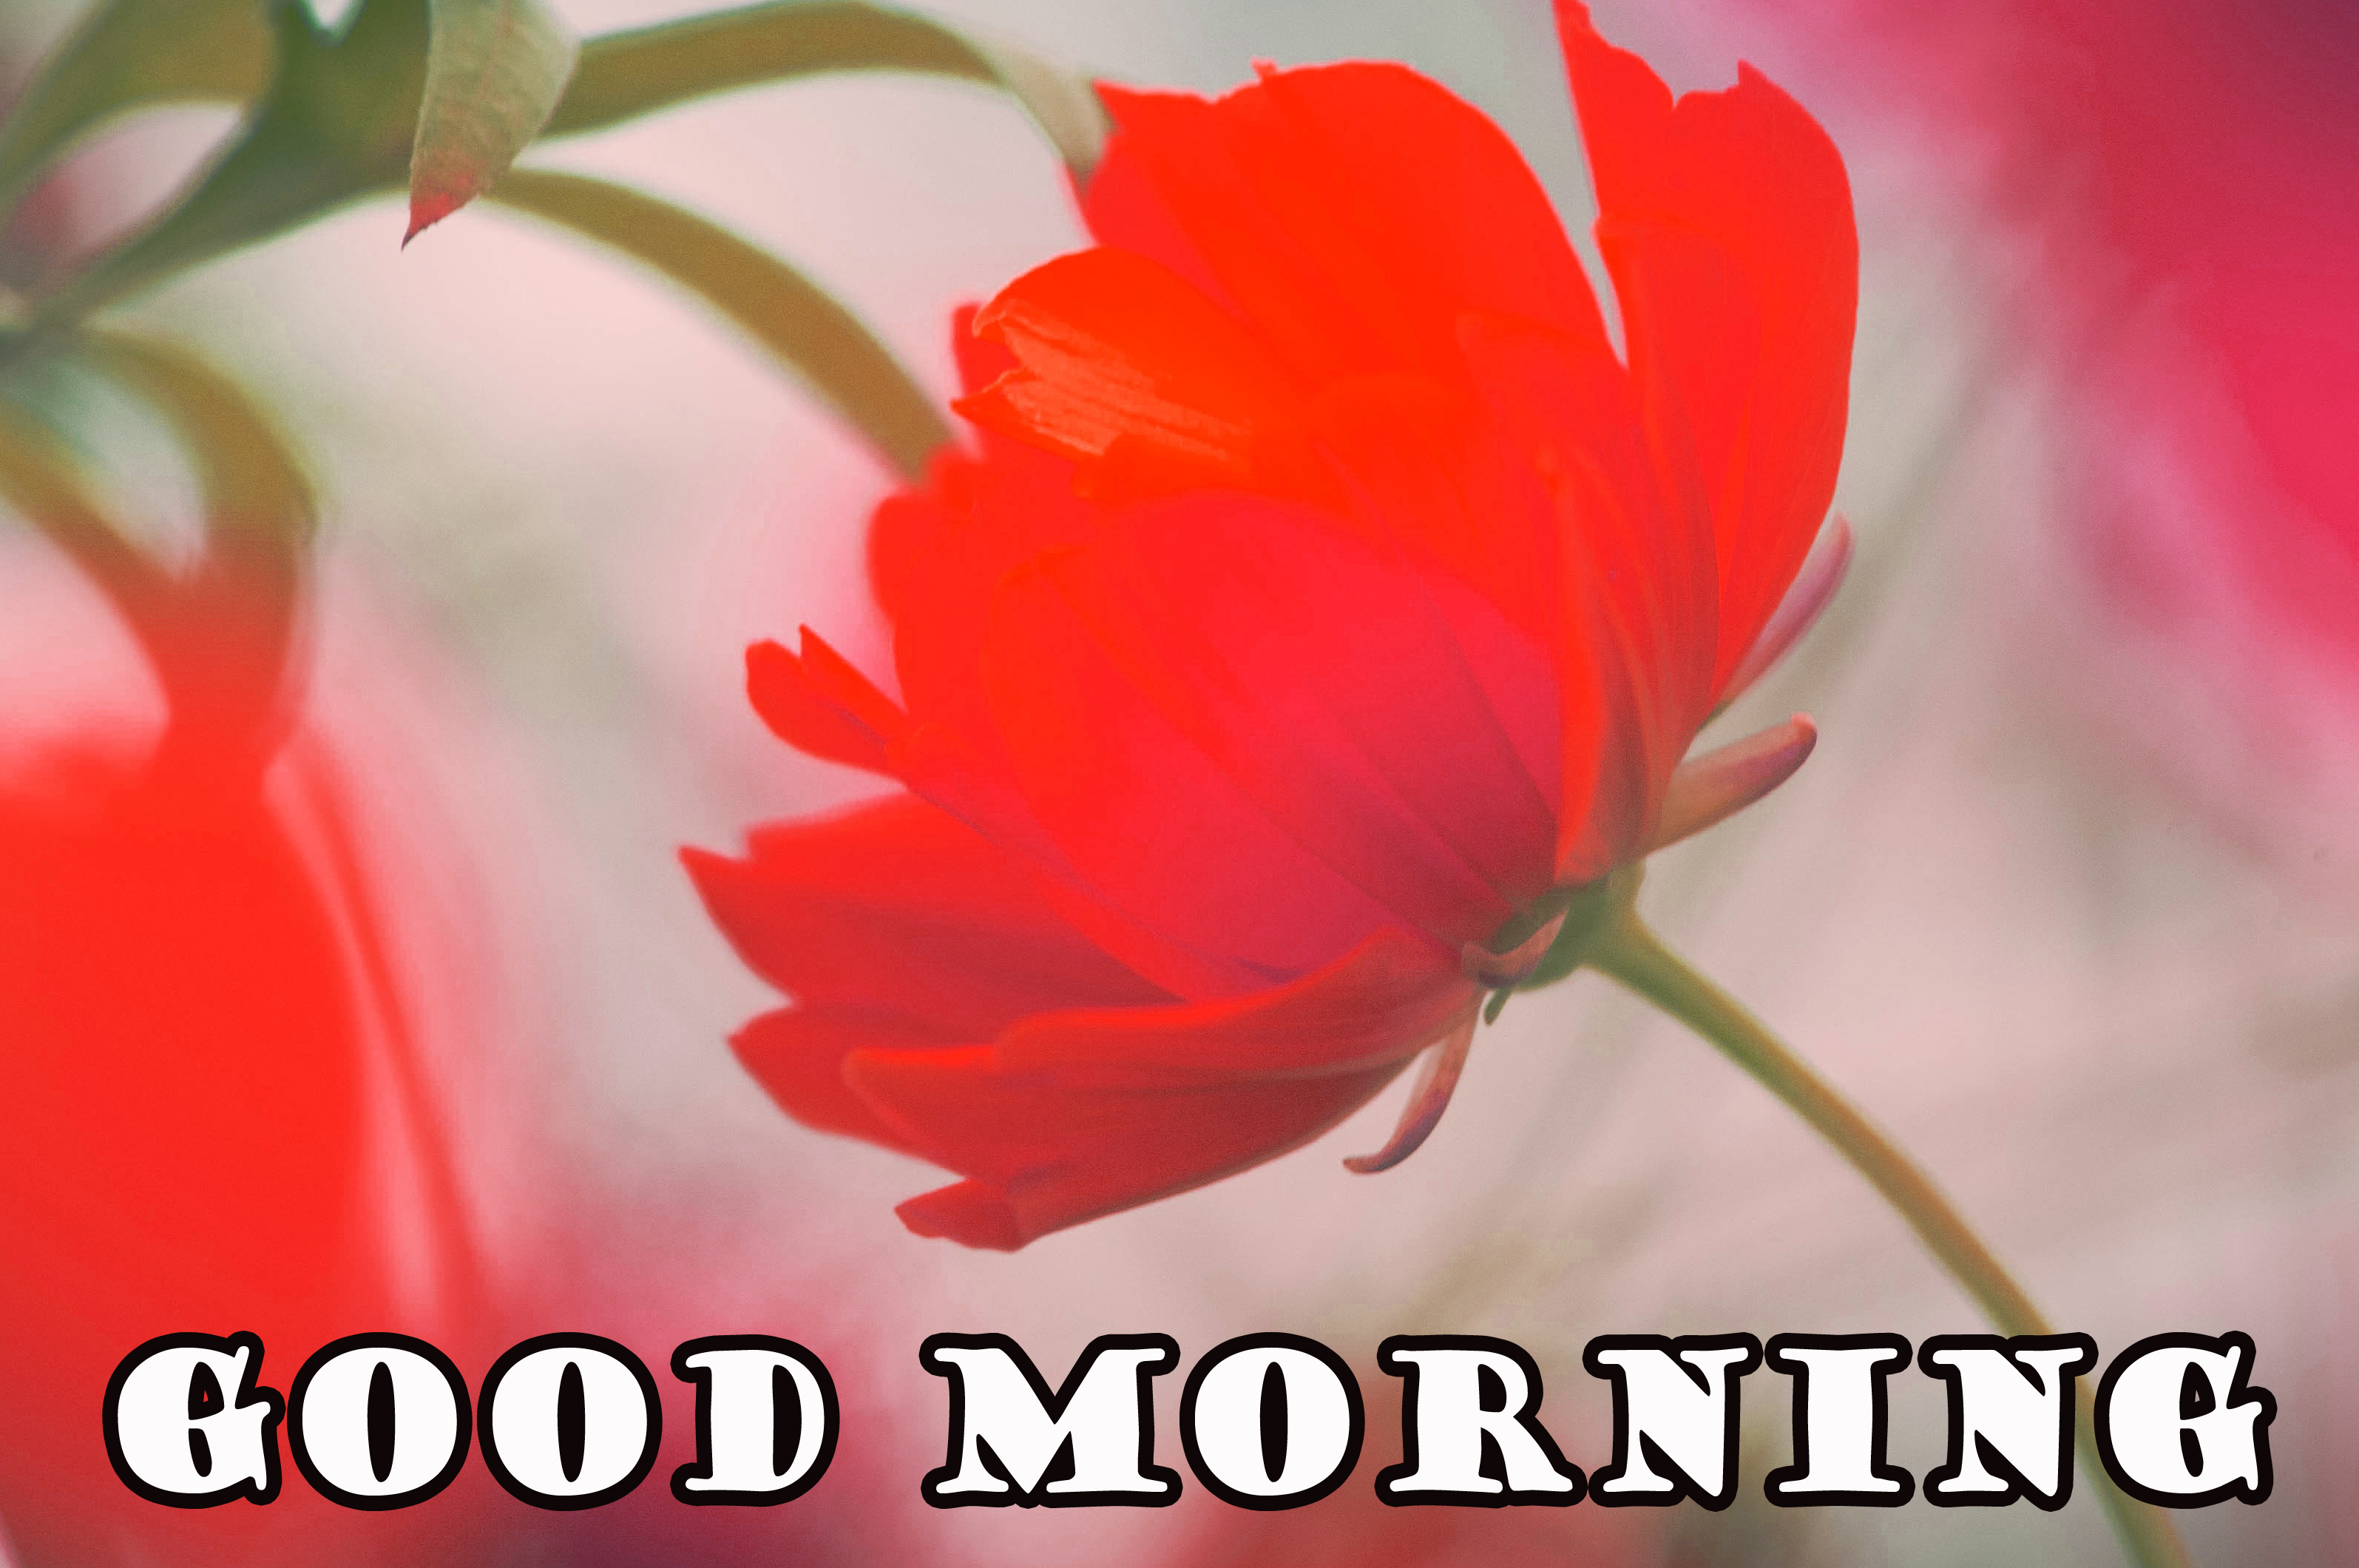 Good Morning Flowers Quotes Wishes Image Wallpaper Photos